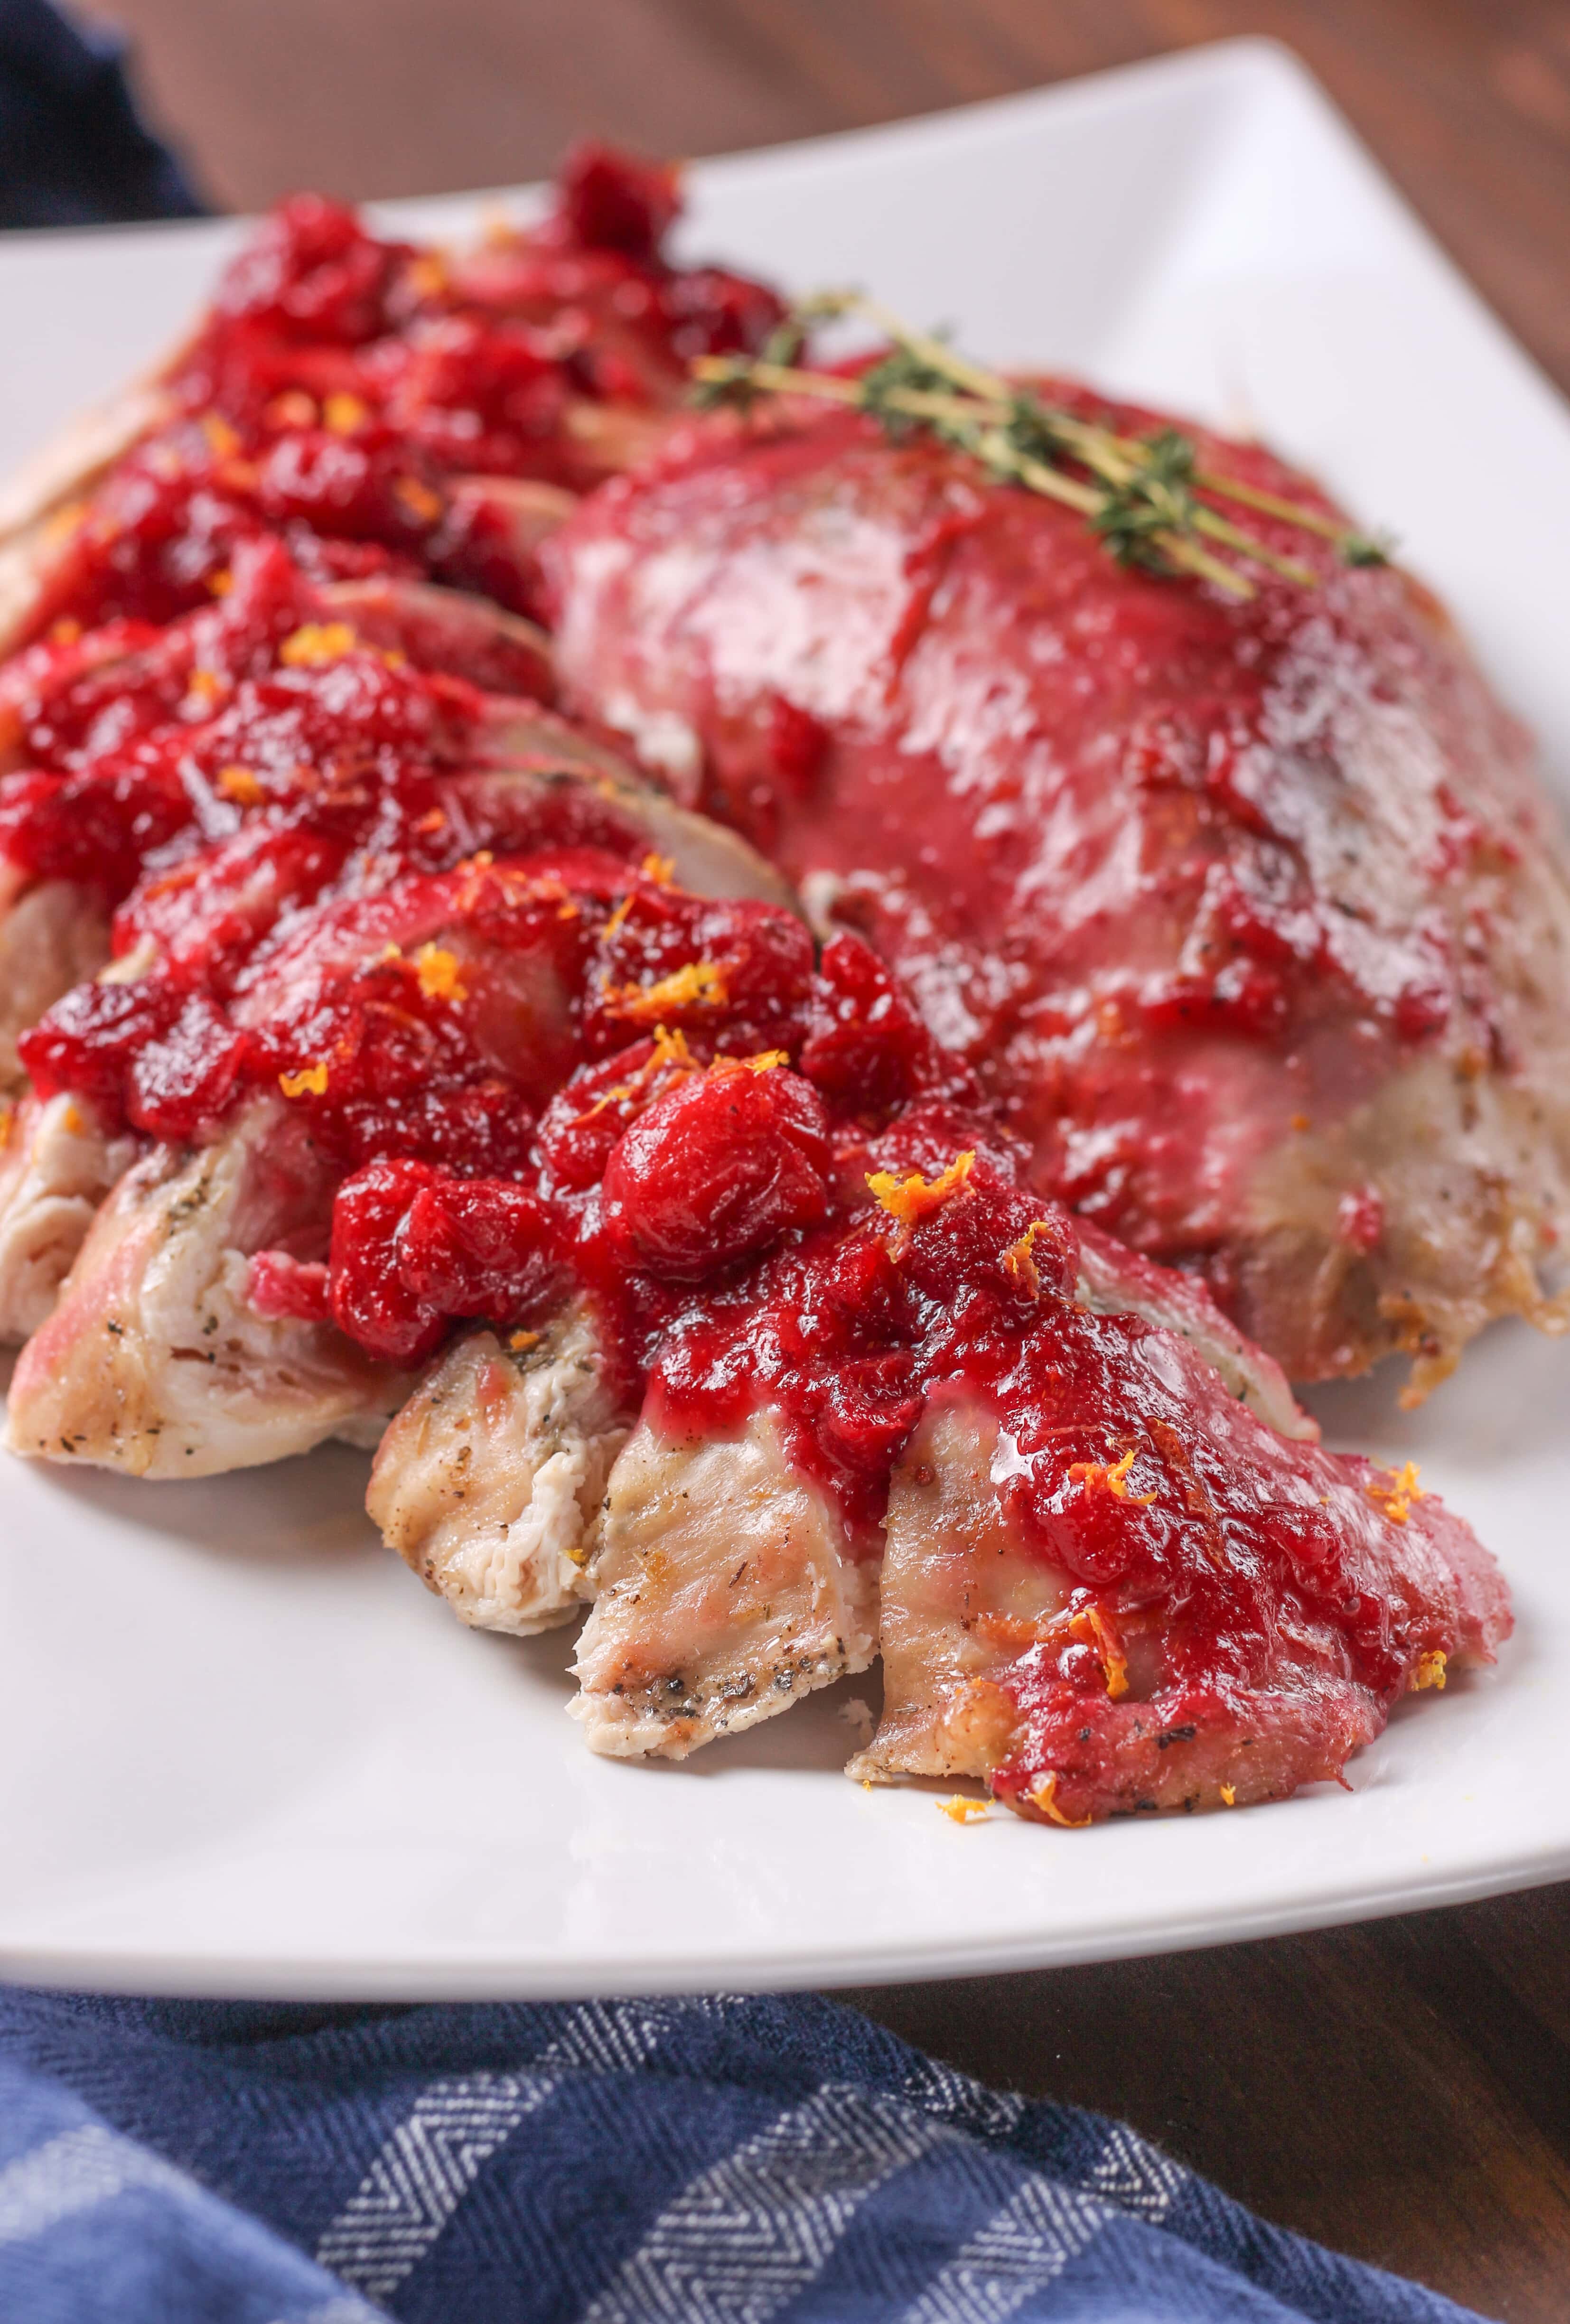 Easy Slow Cooker Cranberry Orange Turkey Breast Recipe from A Kitchen Addiction